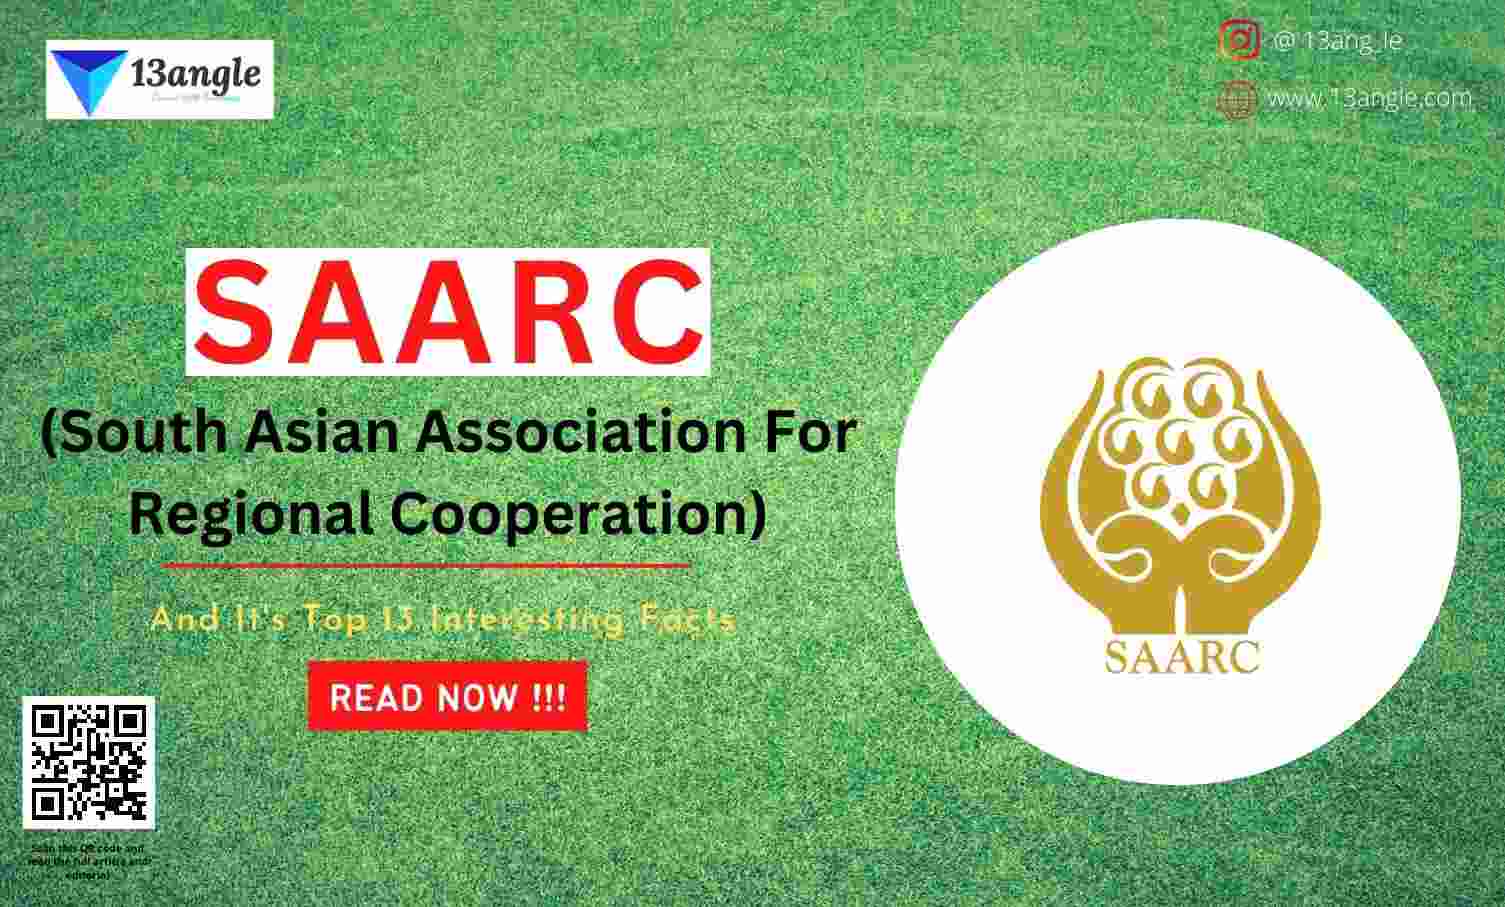 SAARC And It's Top 13 Interesting Facts- 13angle.com